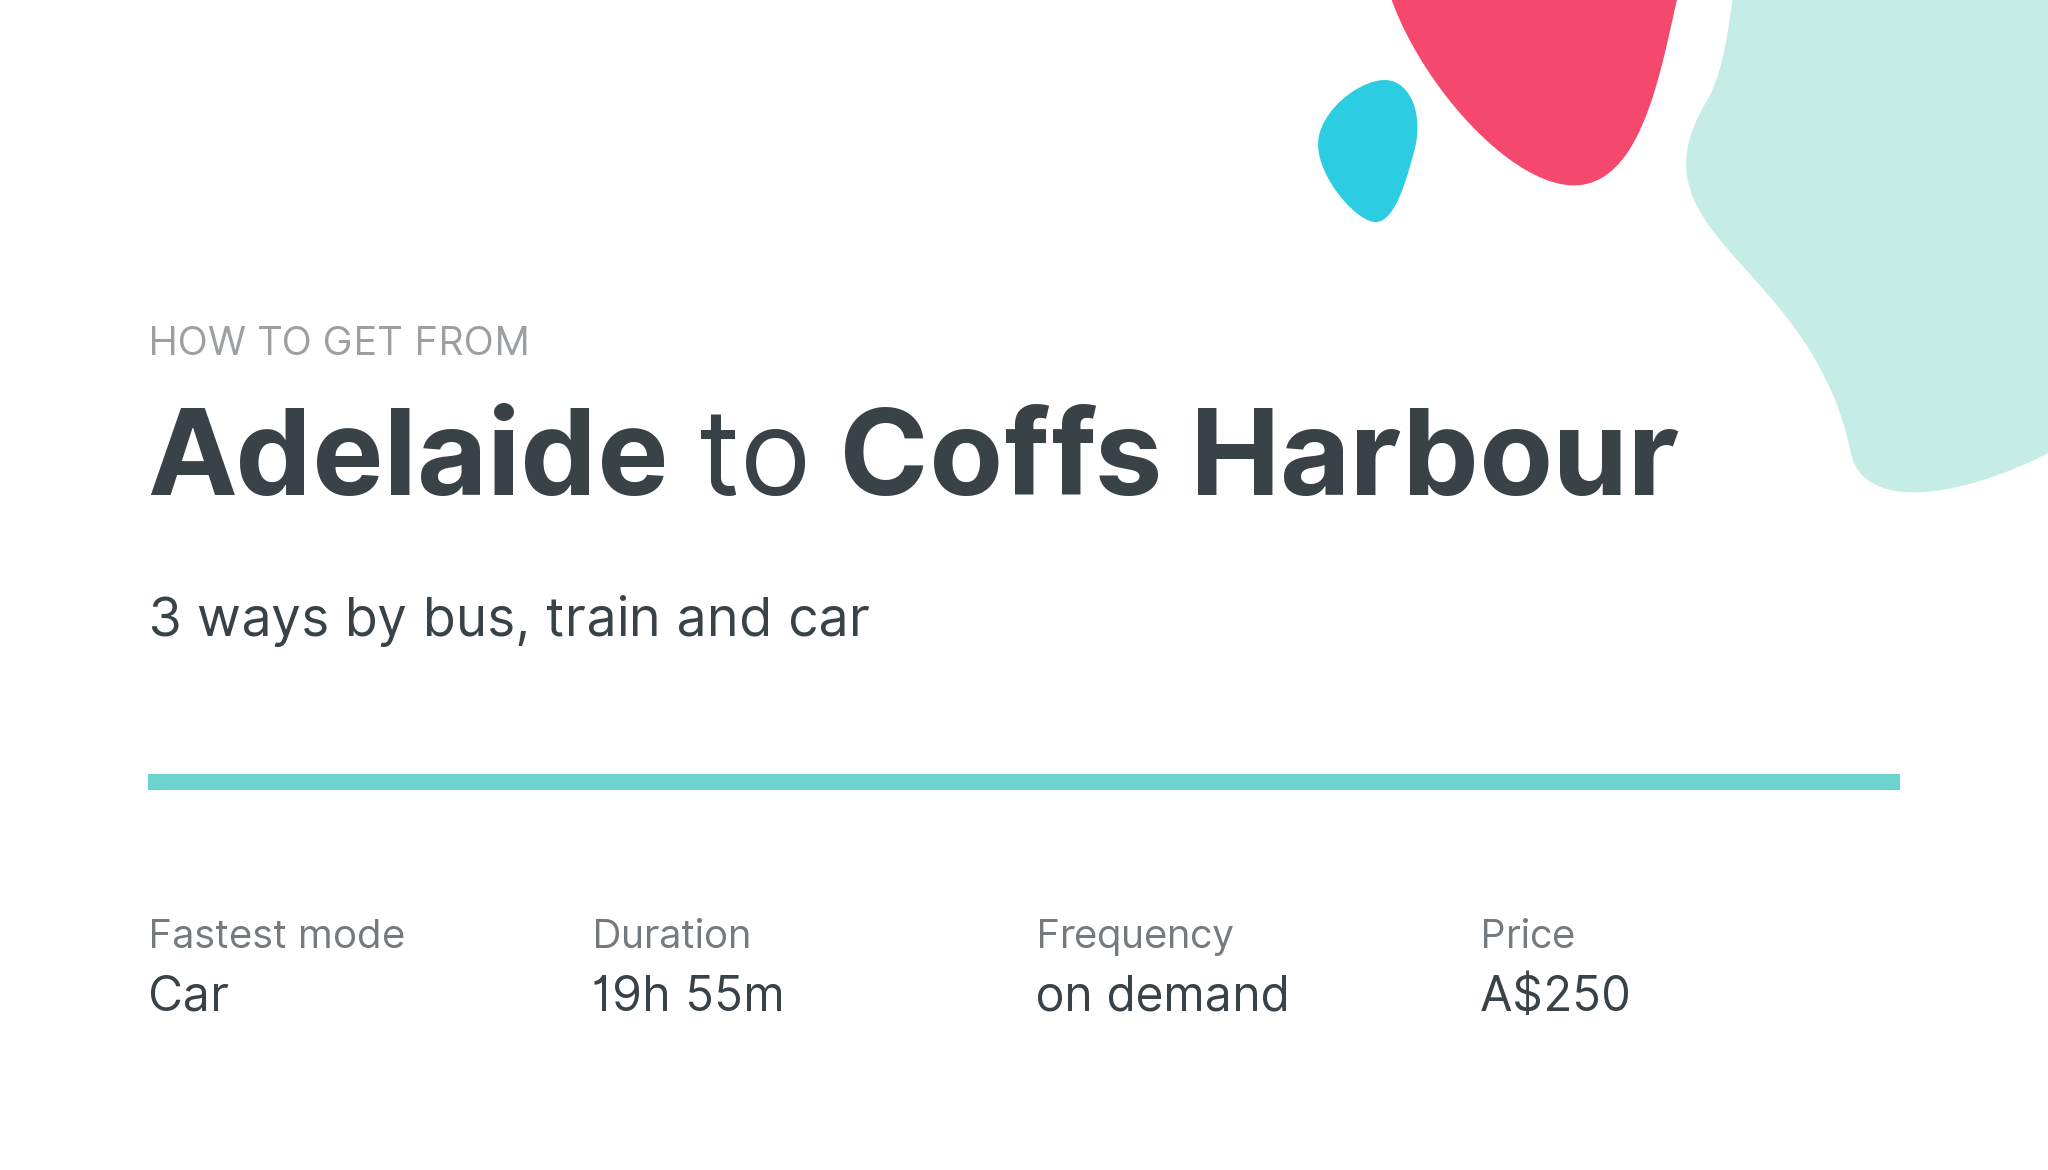 How do I get from Adelaide to Coffs Harbour